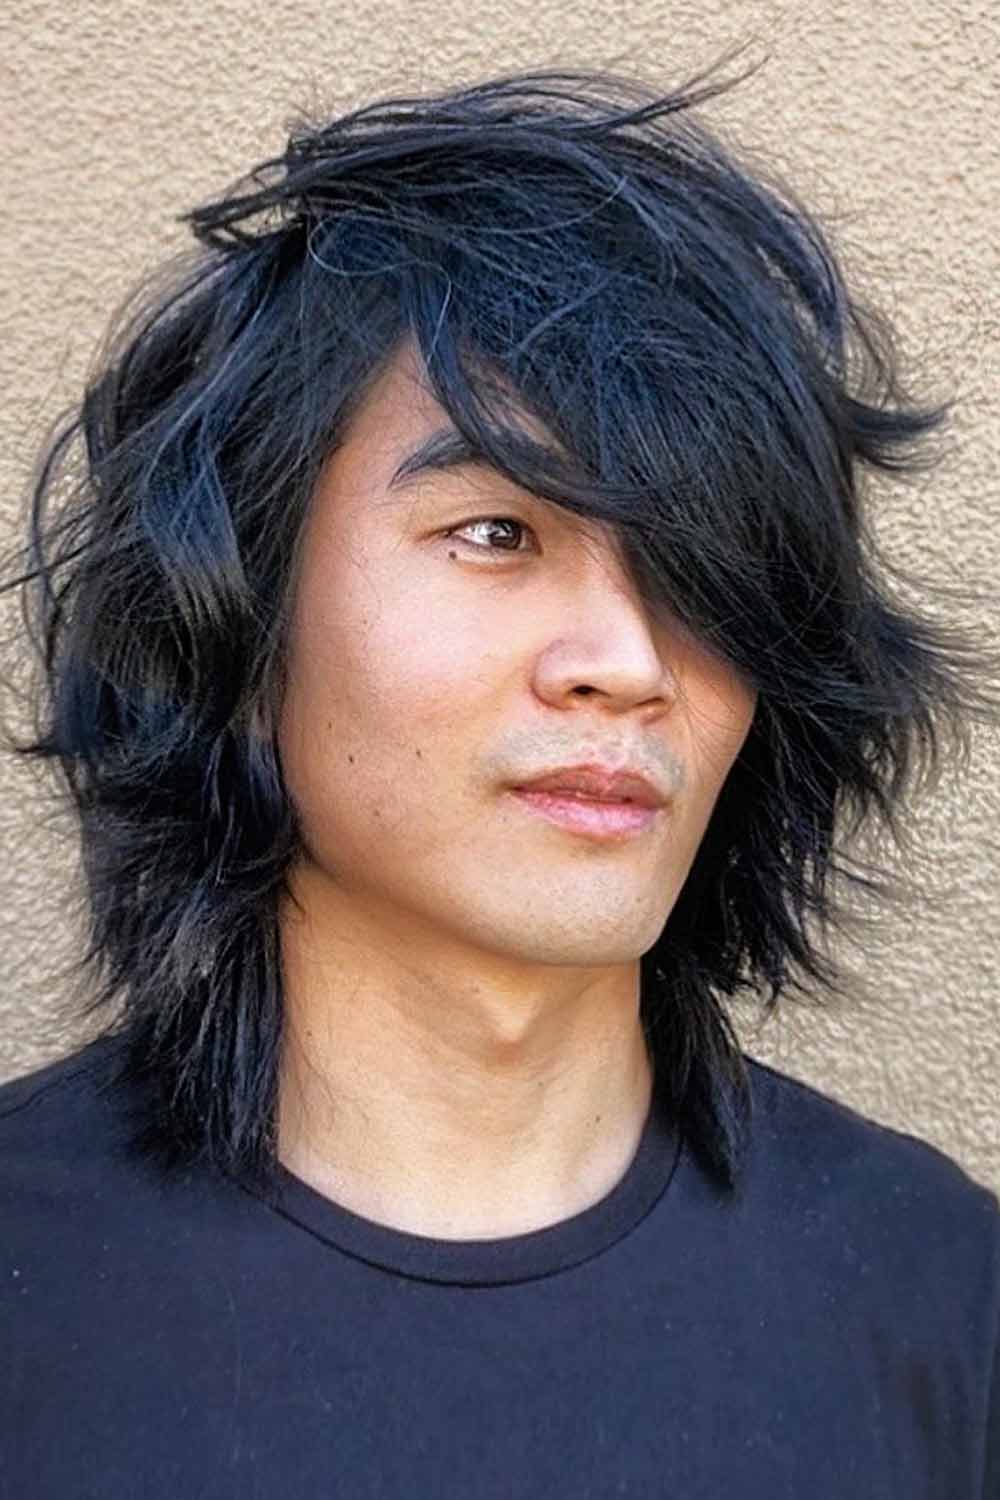 40 Freshest Asian Hairstyles Men Should Try In 2023